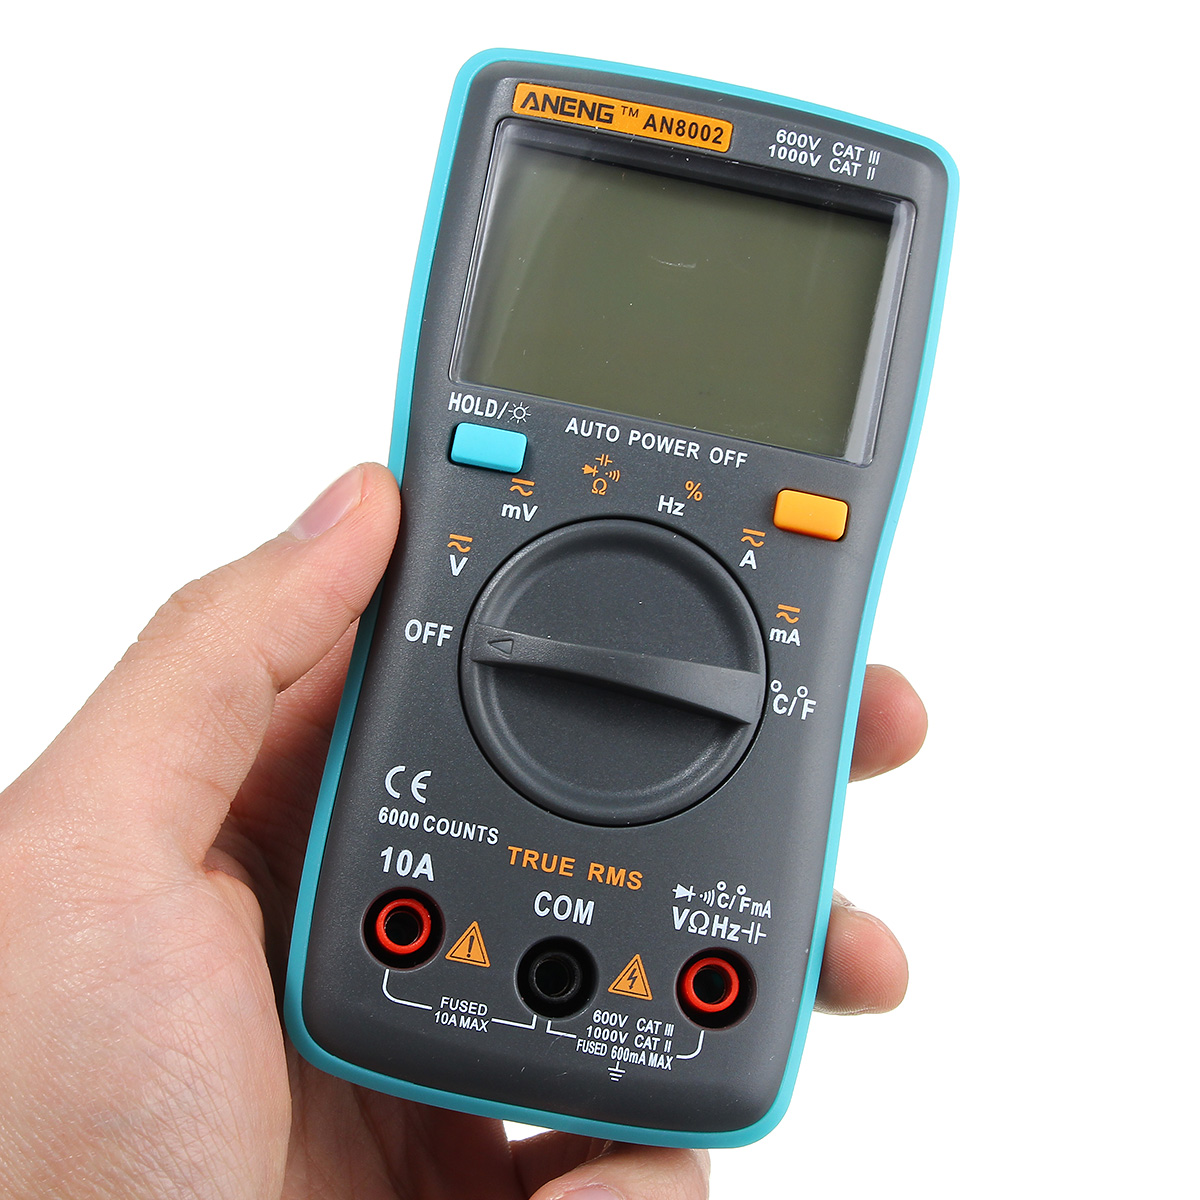 ANENG AN8002 Digital True RMS 6000 Counts Multimeter AC/DC Current Voltage Frequency Resistance Temperature Tester ℃/℉ 152